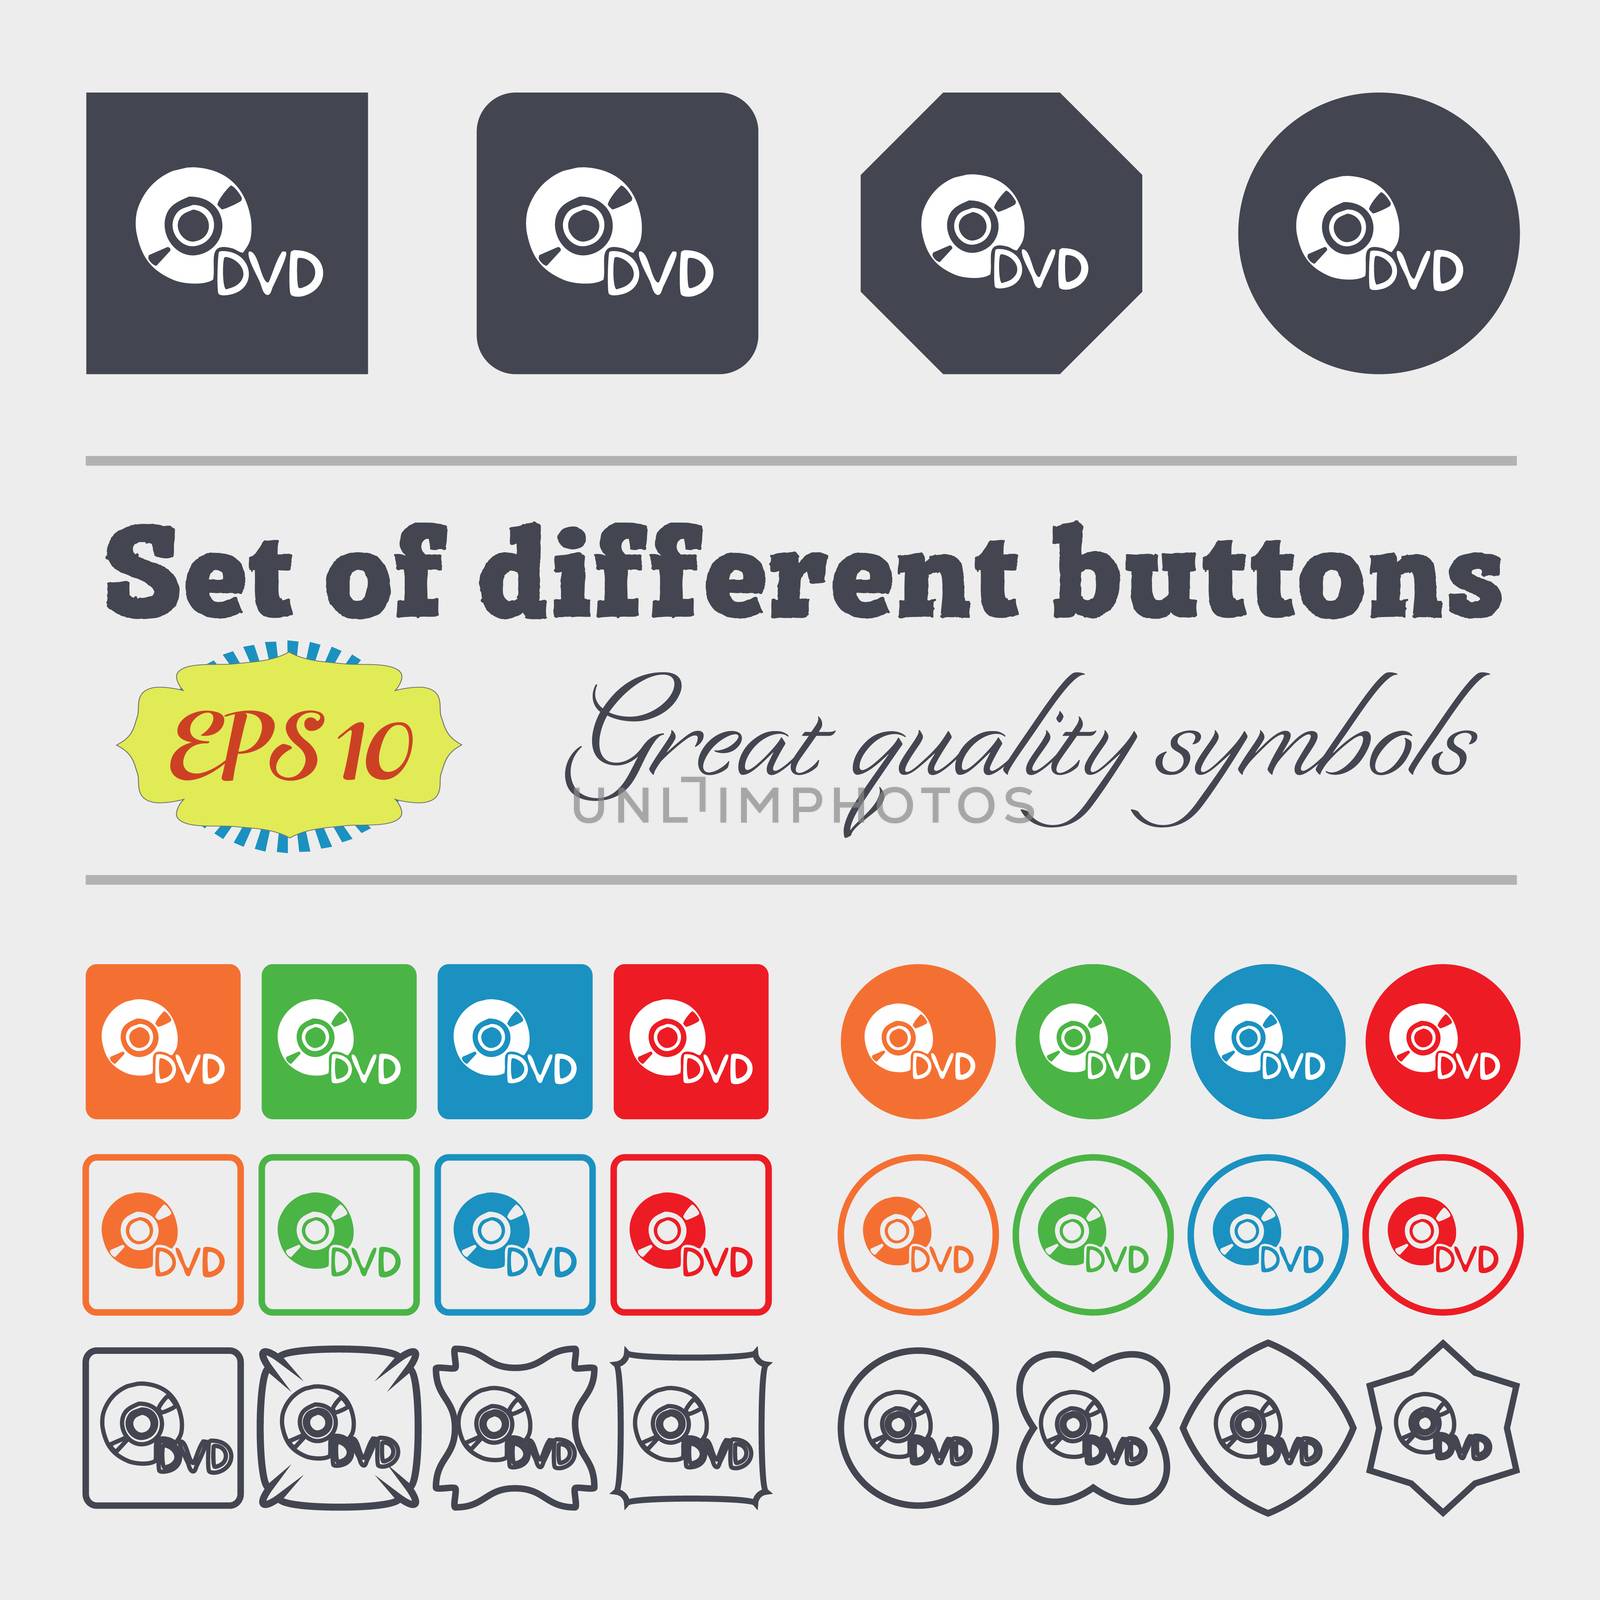 dvd icon sign. Big set of colorful, diverse, high-quality buttons. illustration